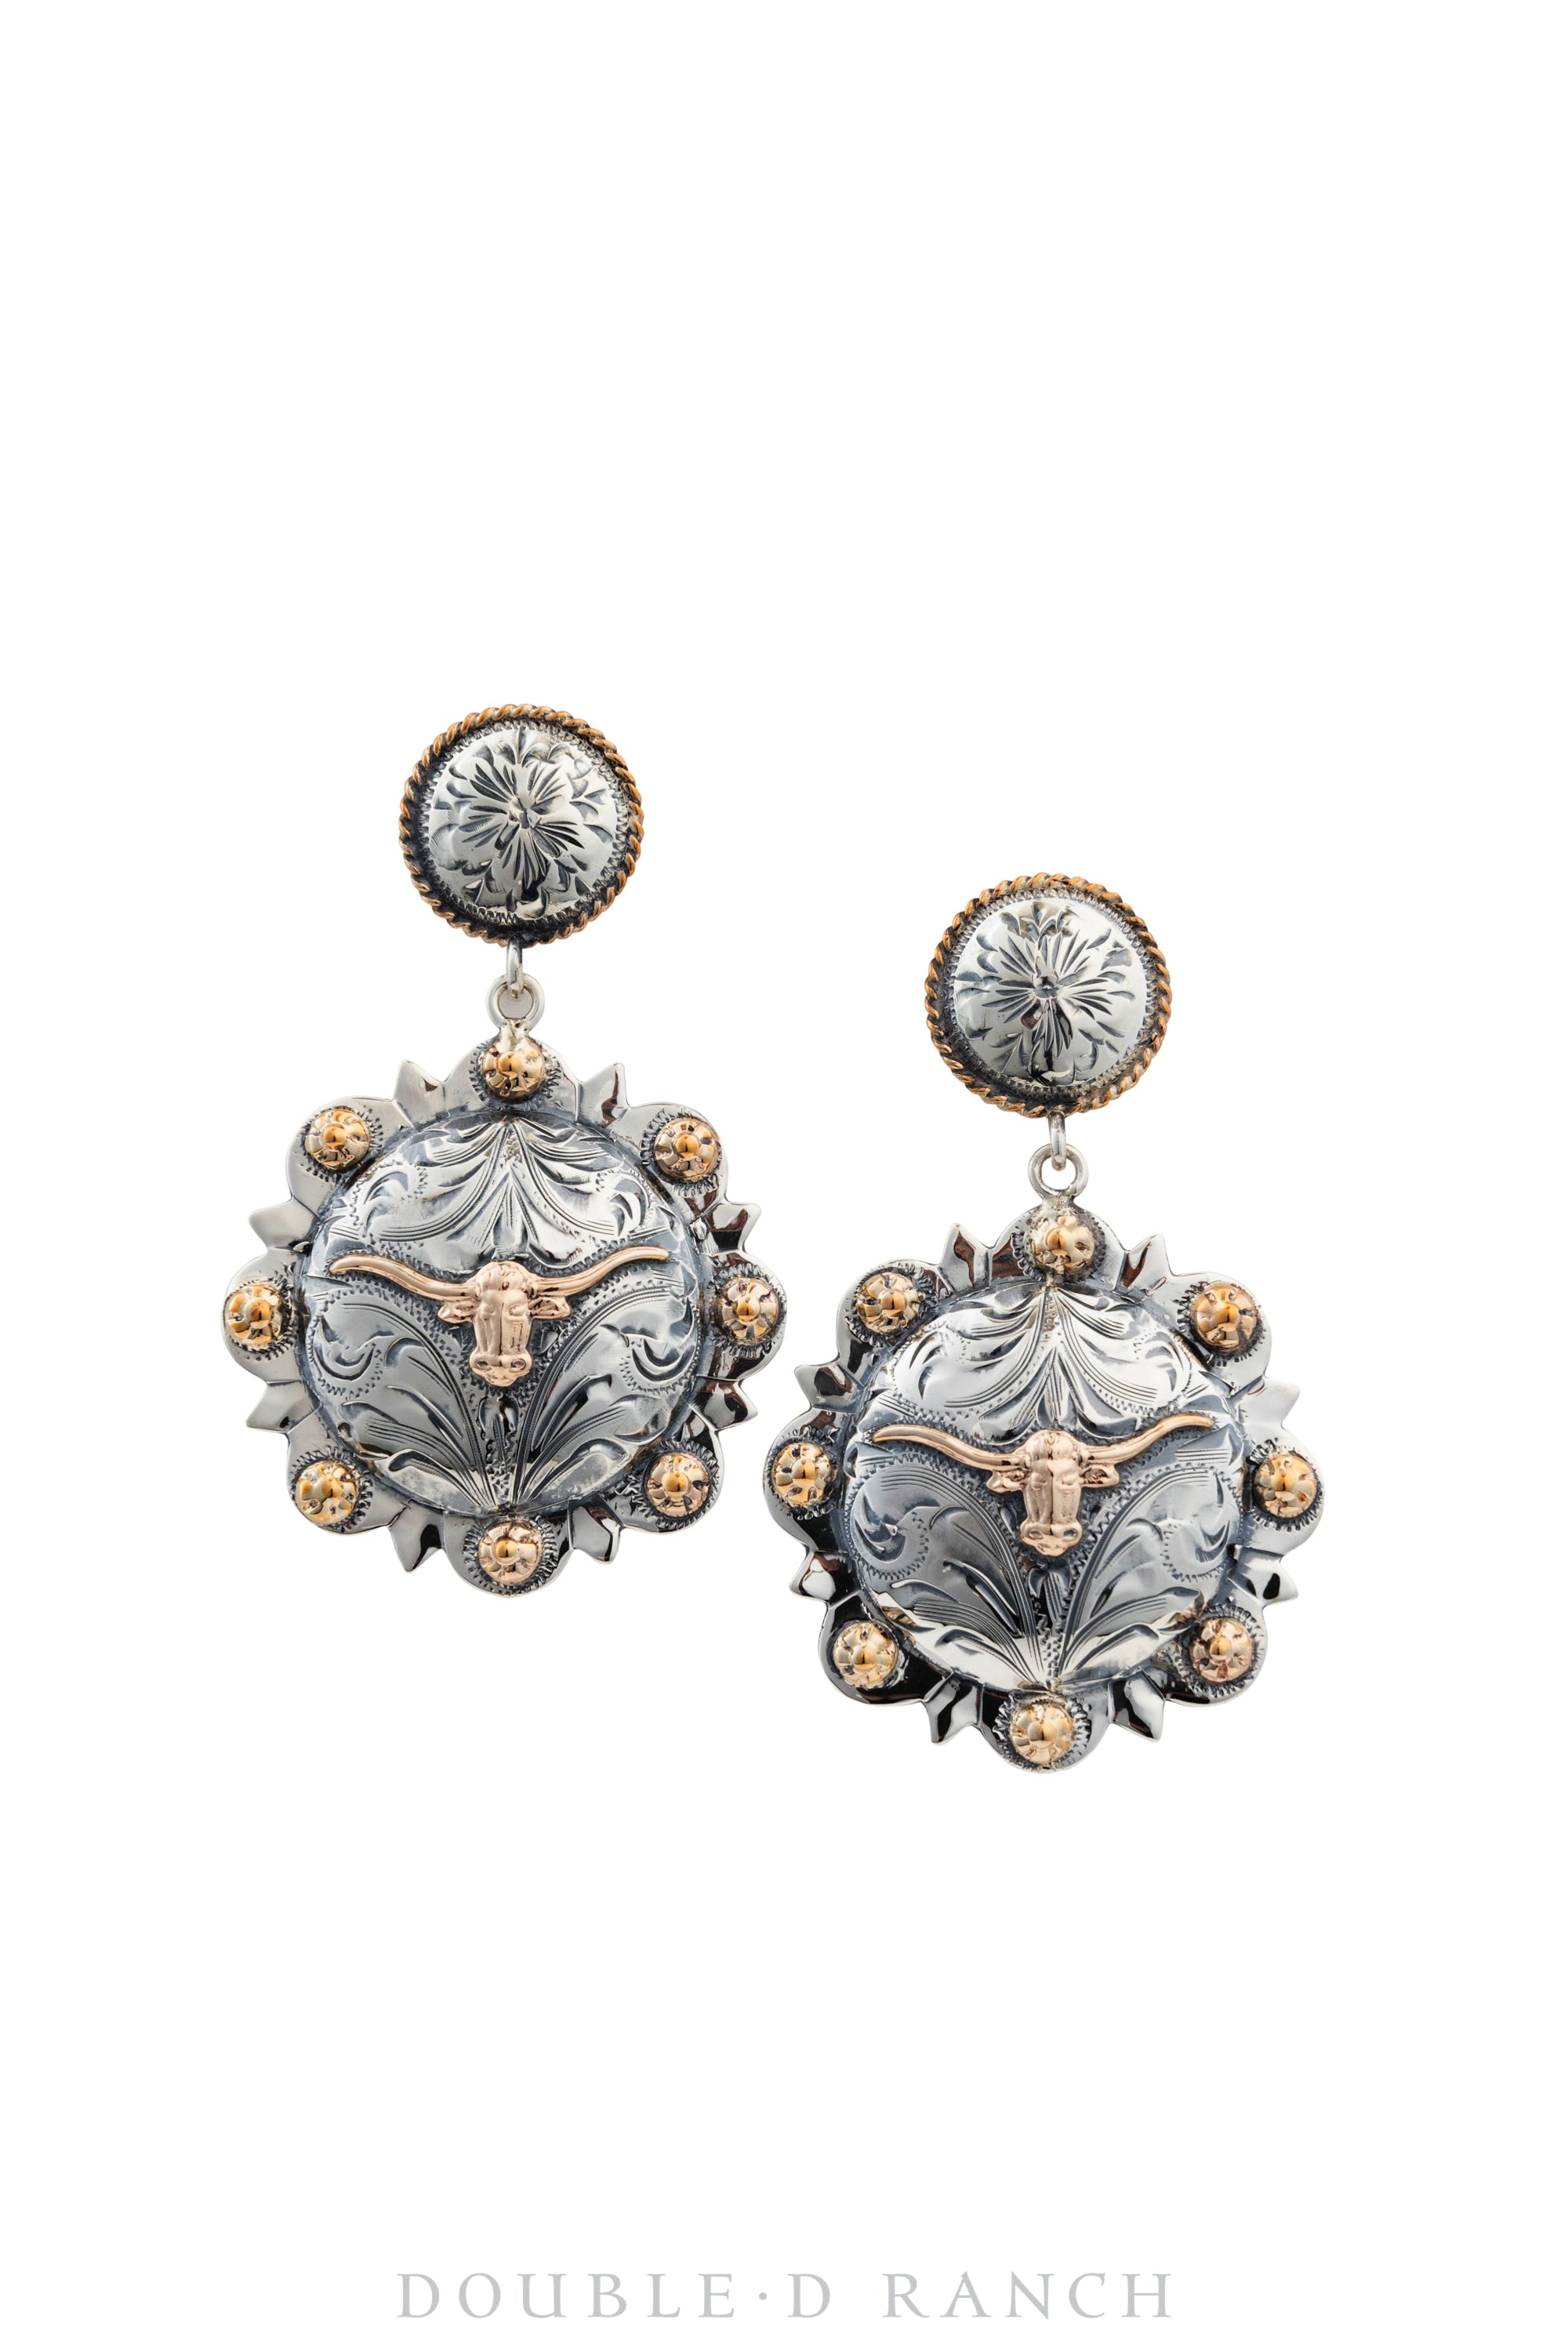 Earrings, Concho, Western Engraved, Star, Contemporary, 1298